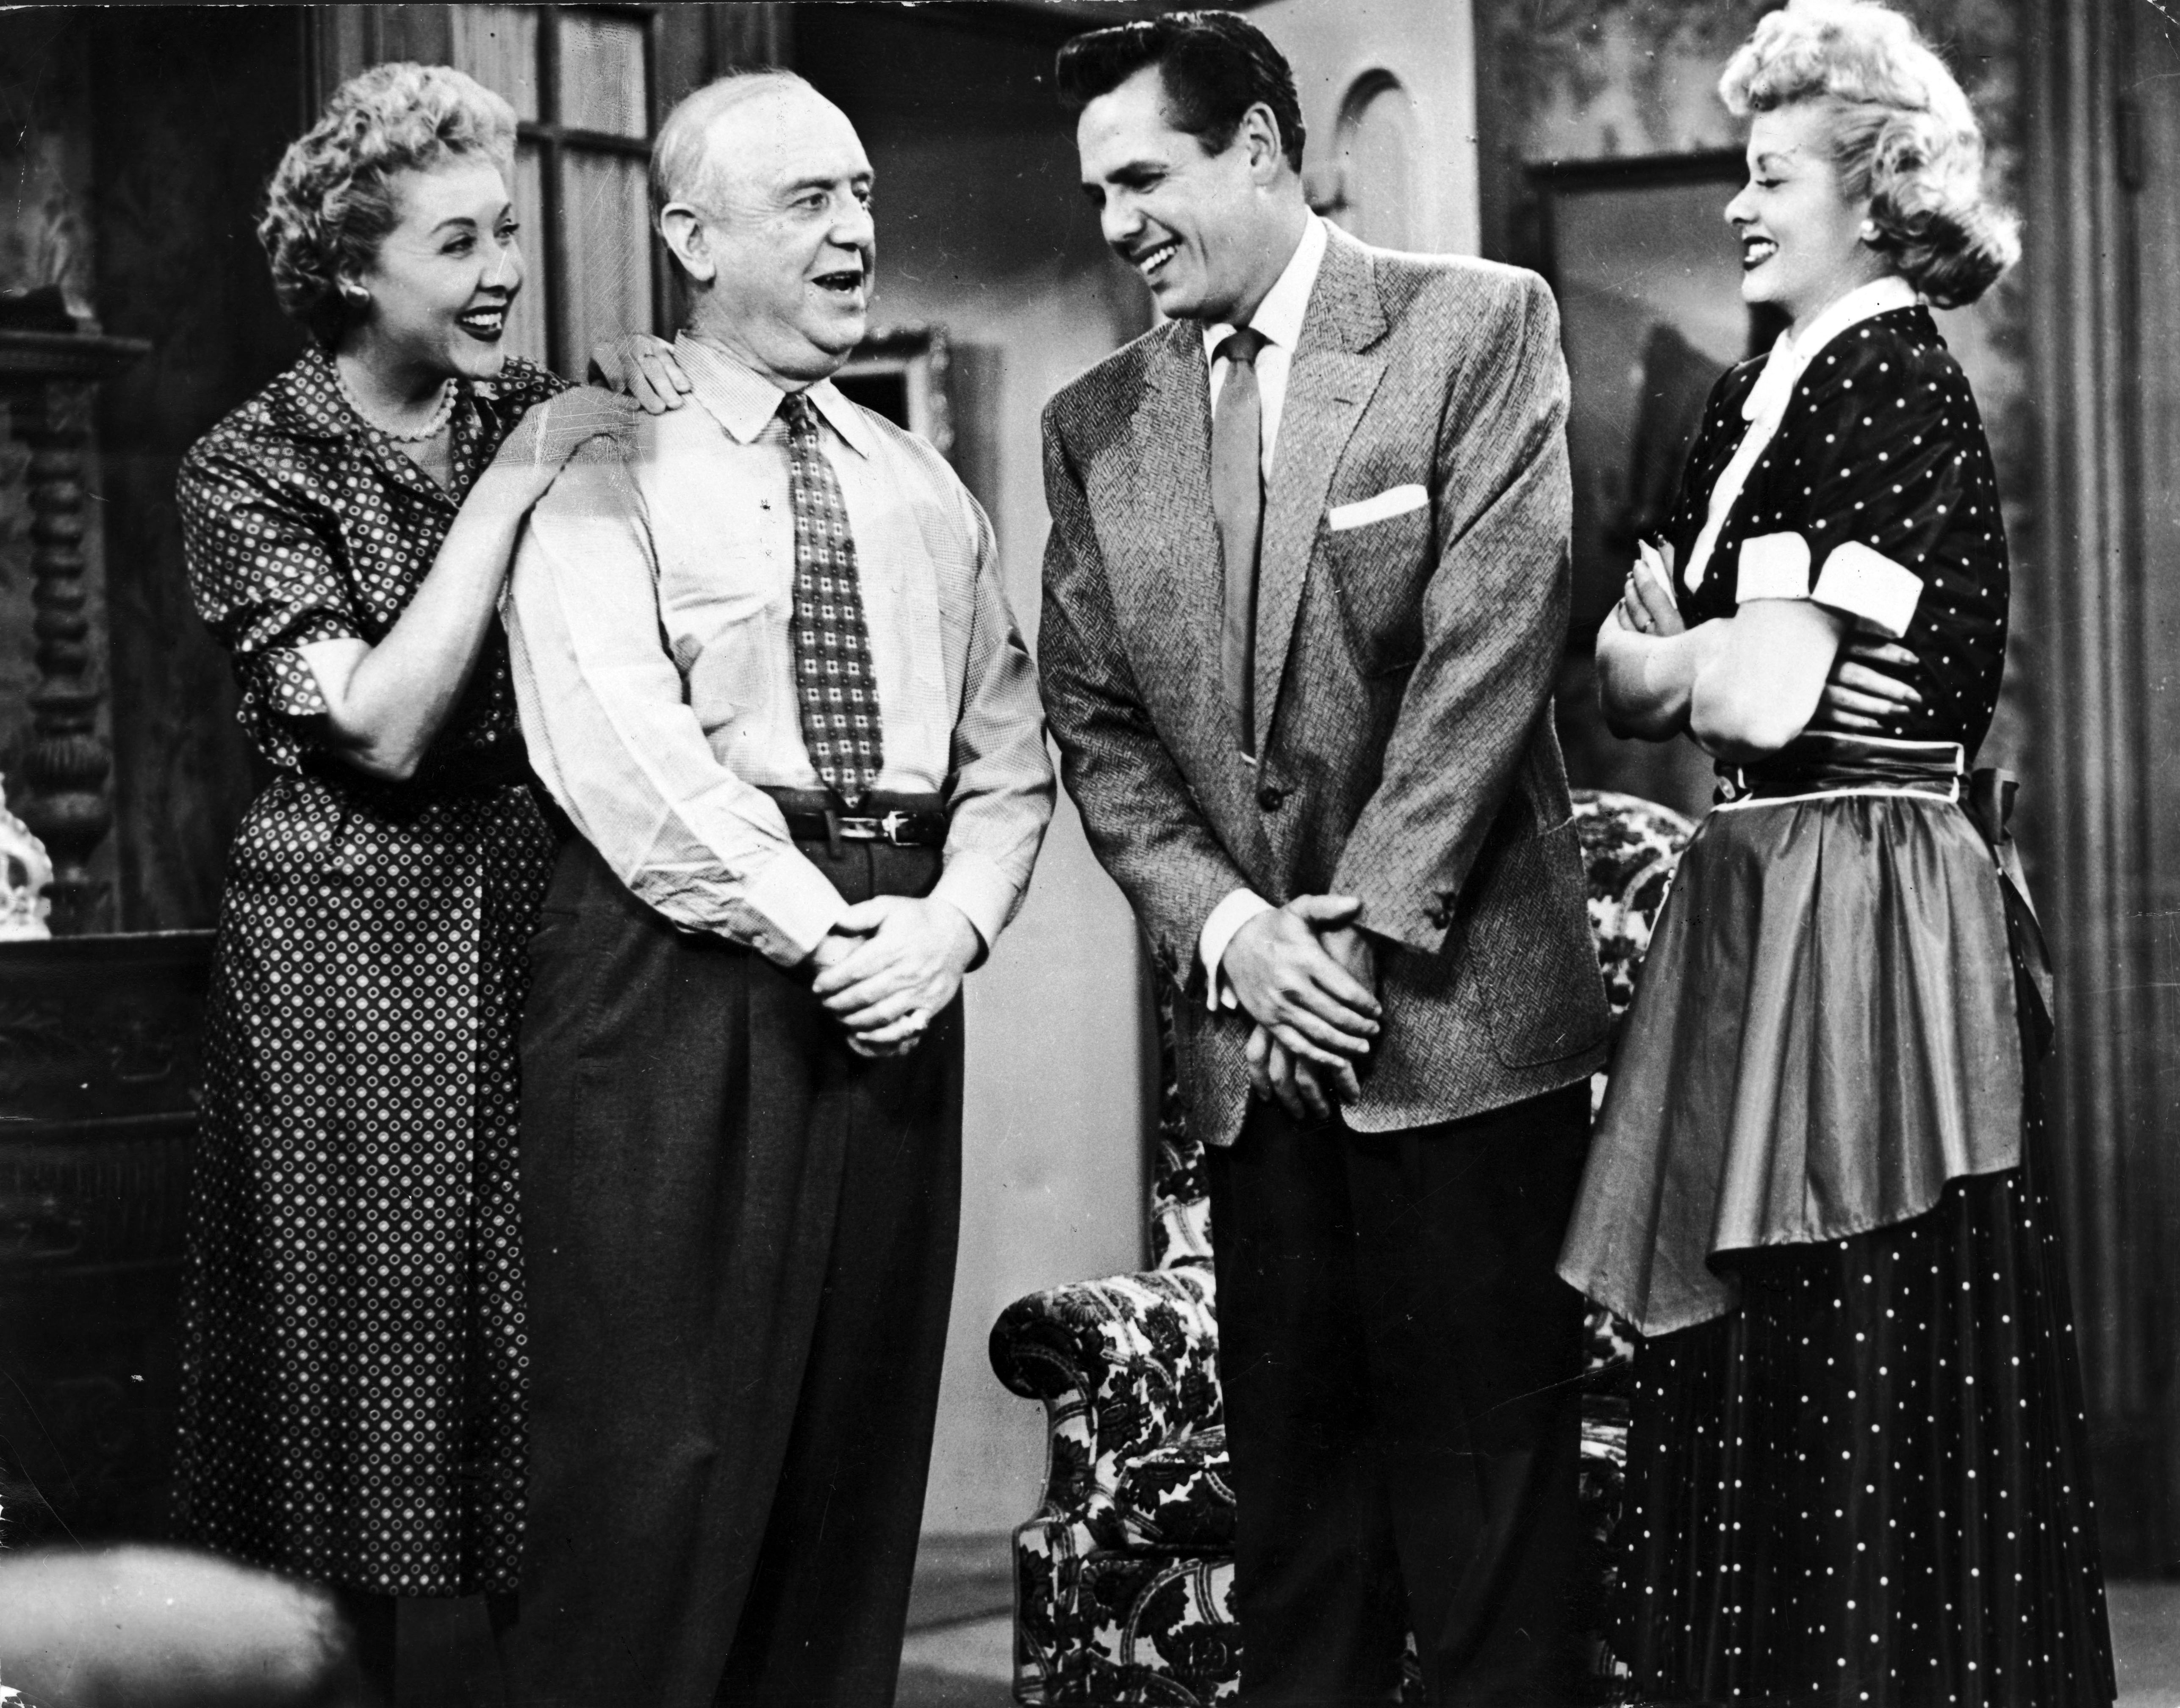 Vivian Vance, William Frawley, Desi Arnaz and Lucille Ball of 'I Love Lucy' 